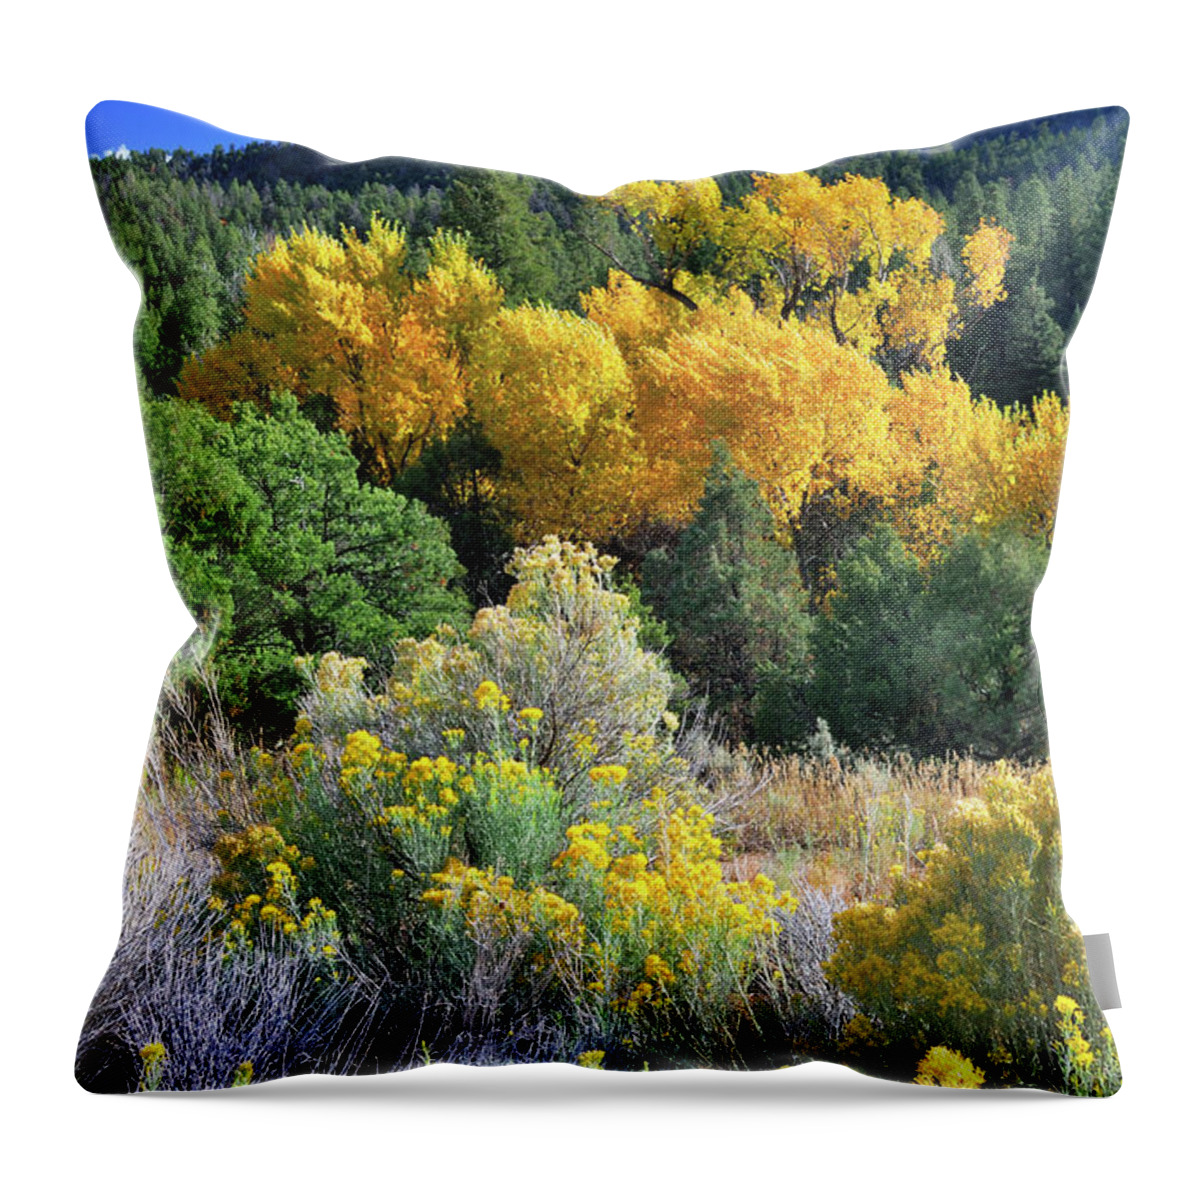 Landscape Throw Pillow featuring the photograph Autumn In The Canyon by Ron Cline